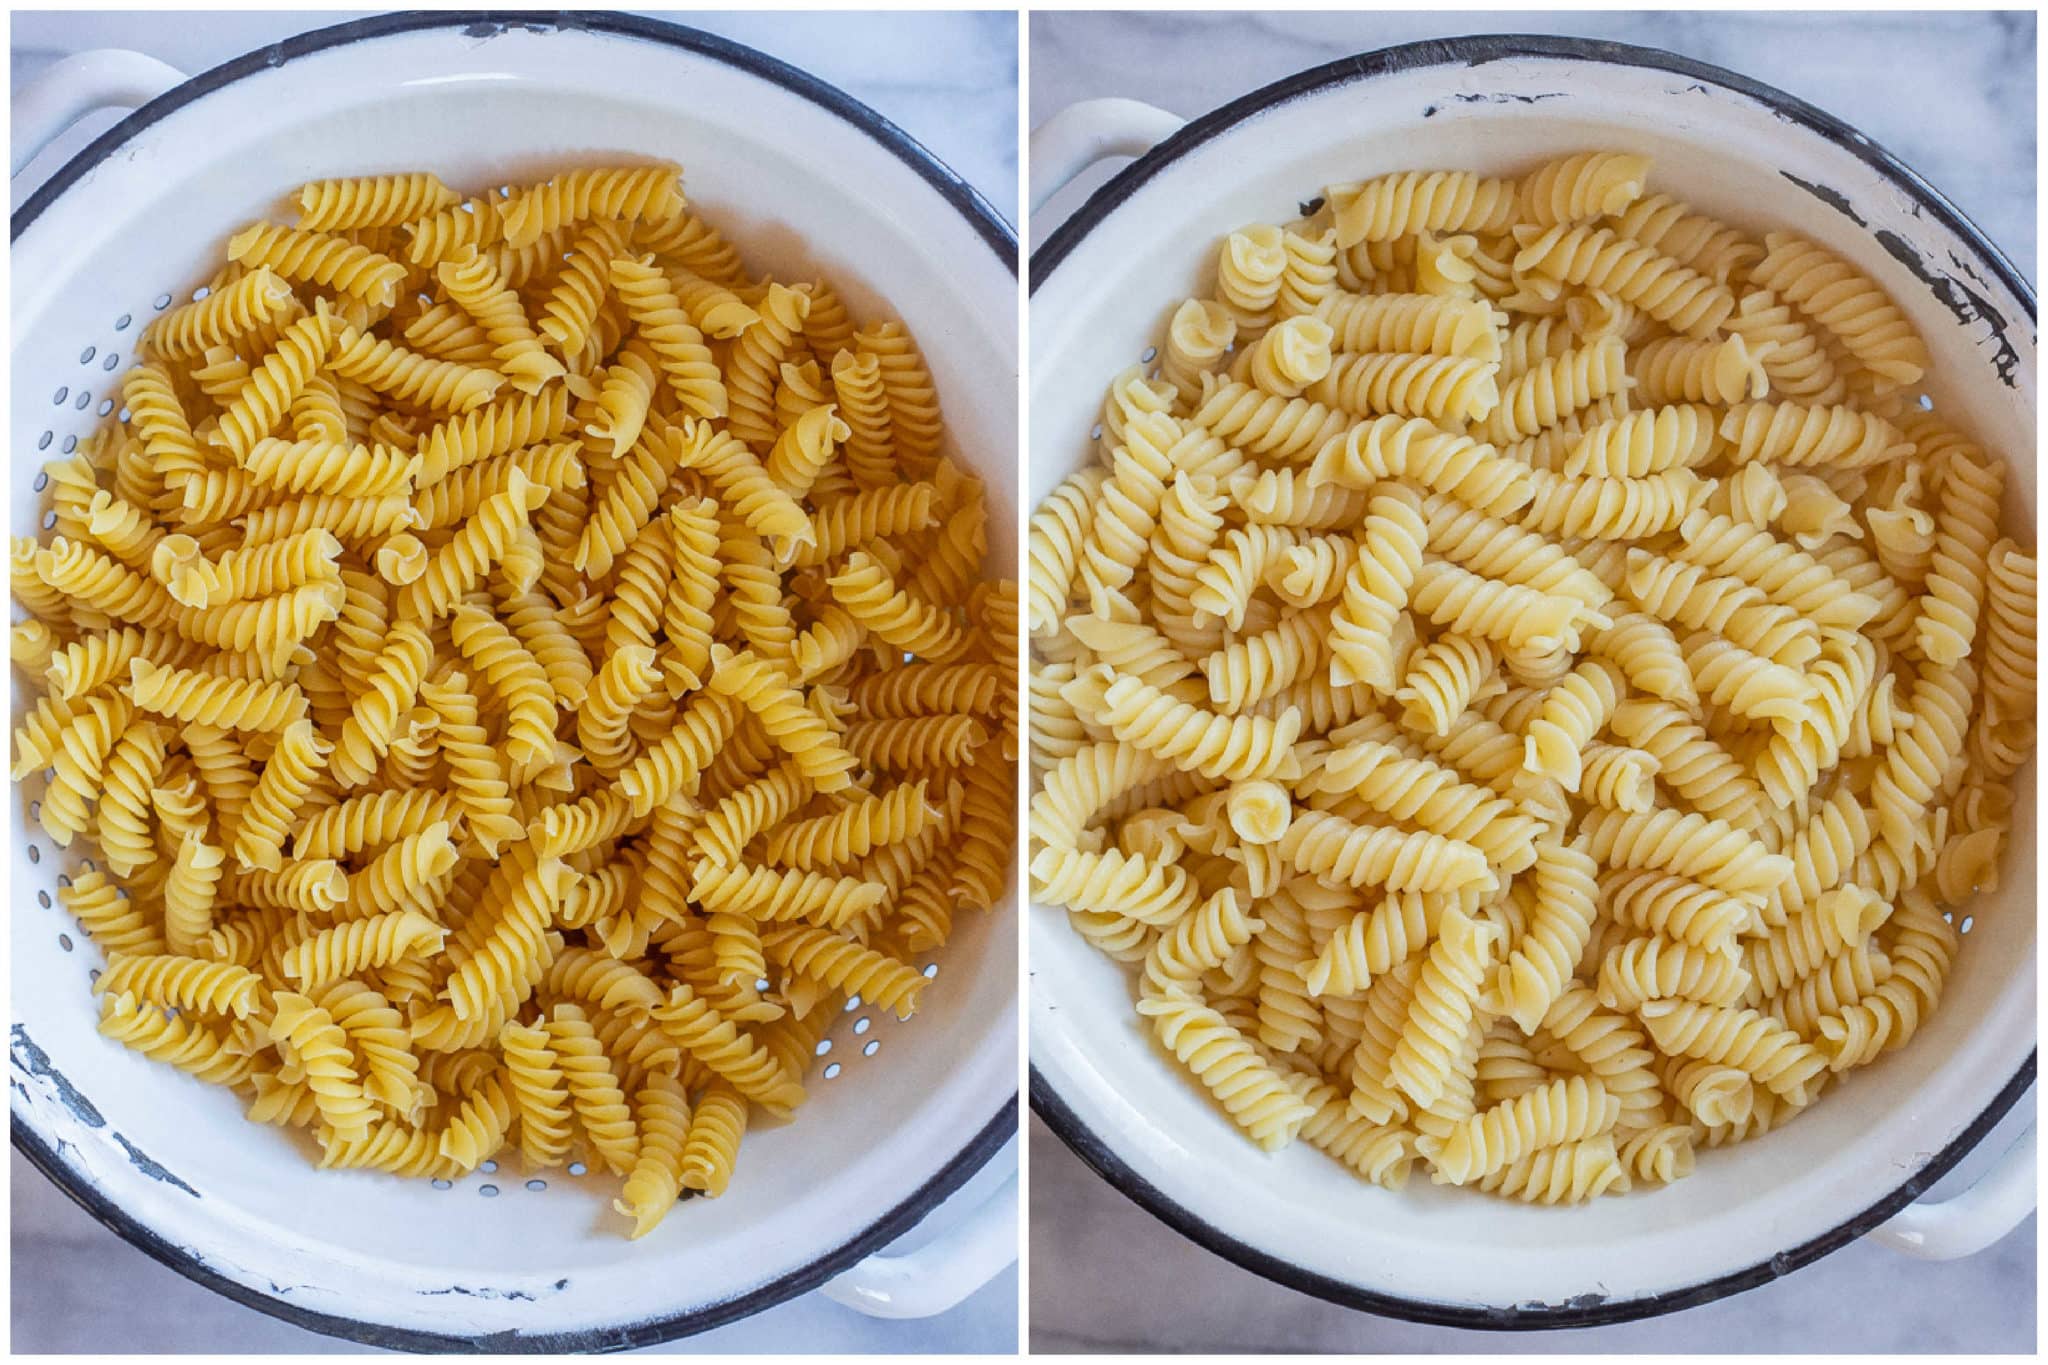 rotini noodles before and after being cooked